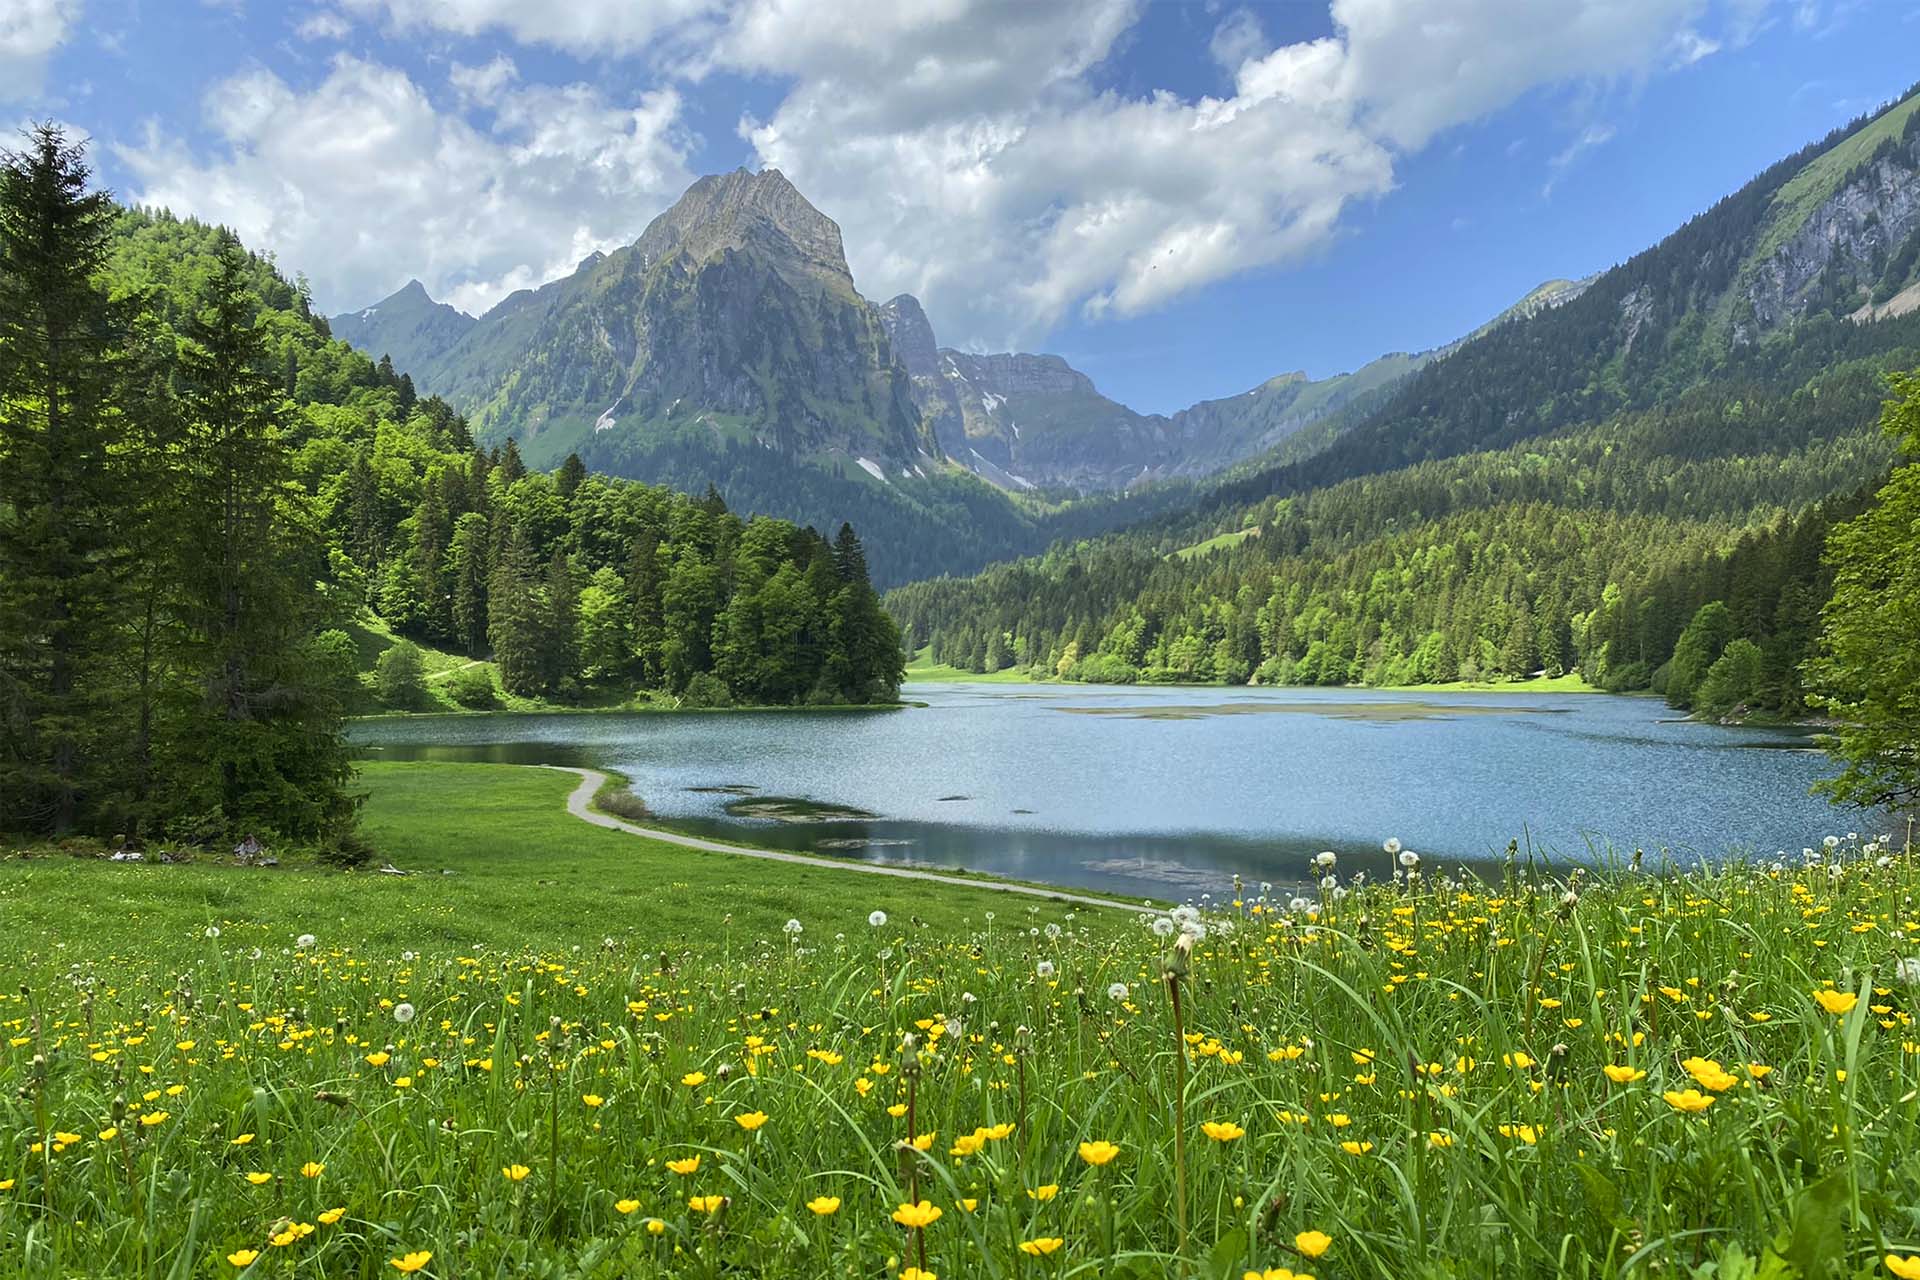 Lake Obersee, our favorite lake near Zurich.